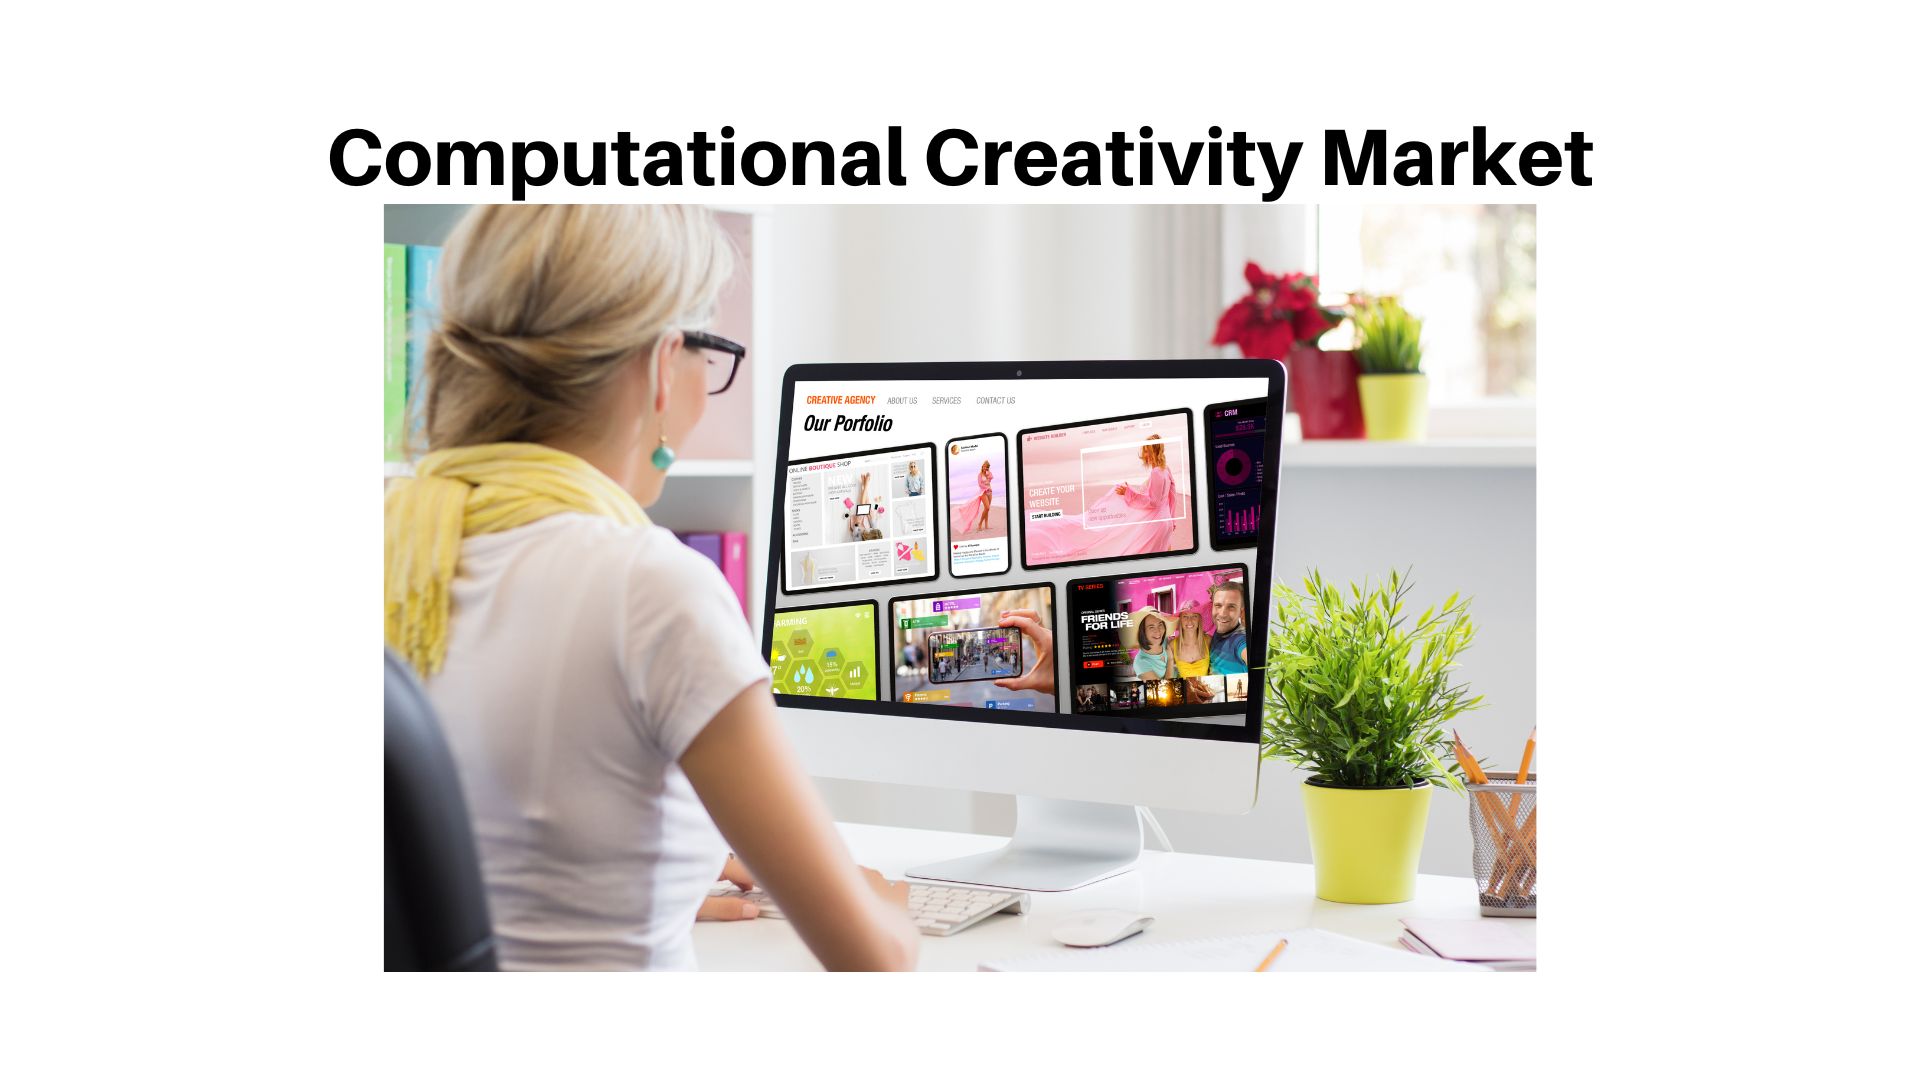 Computational Creativity Market size is expected to reach USD 4.53 Bn by 2033